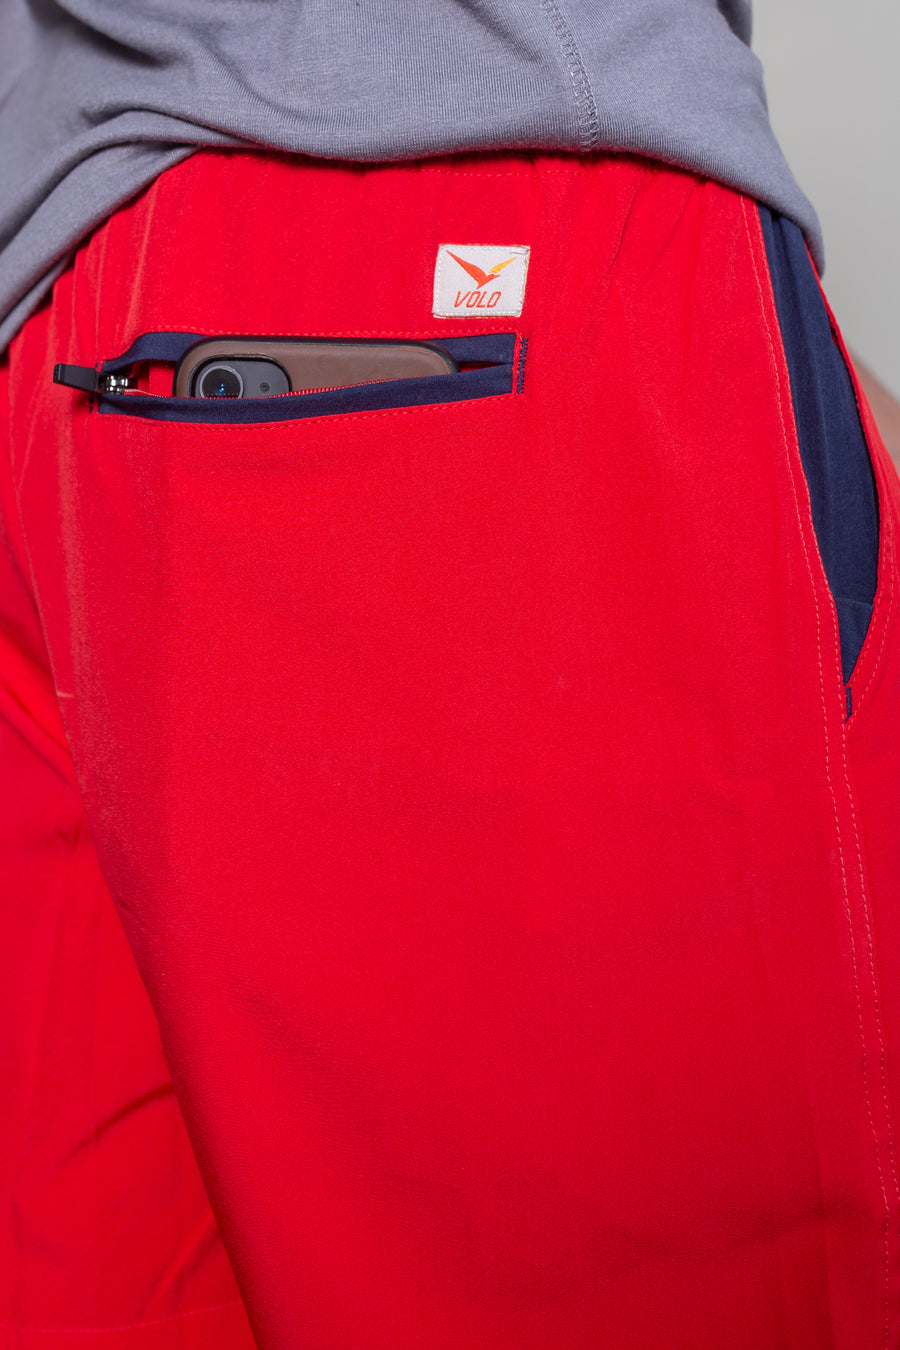 Men's Earth Shorts in Red | VOLO Apparel | Designed to fit into your active life without looking like athletic wear. Earth Shorts 2.0 come with a super strong ultralight microstretch fabric and a five pocket design. Two zipper pockets, a security pocket and super quick drying material. The shorts feature an internal drawstring and are reinforced stitched and ultra durable for all your adventures in or out of the city.